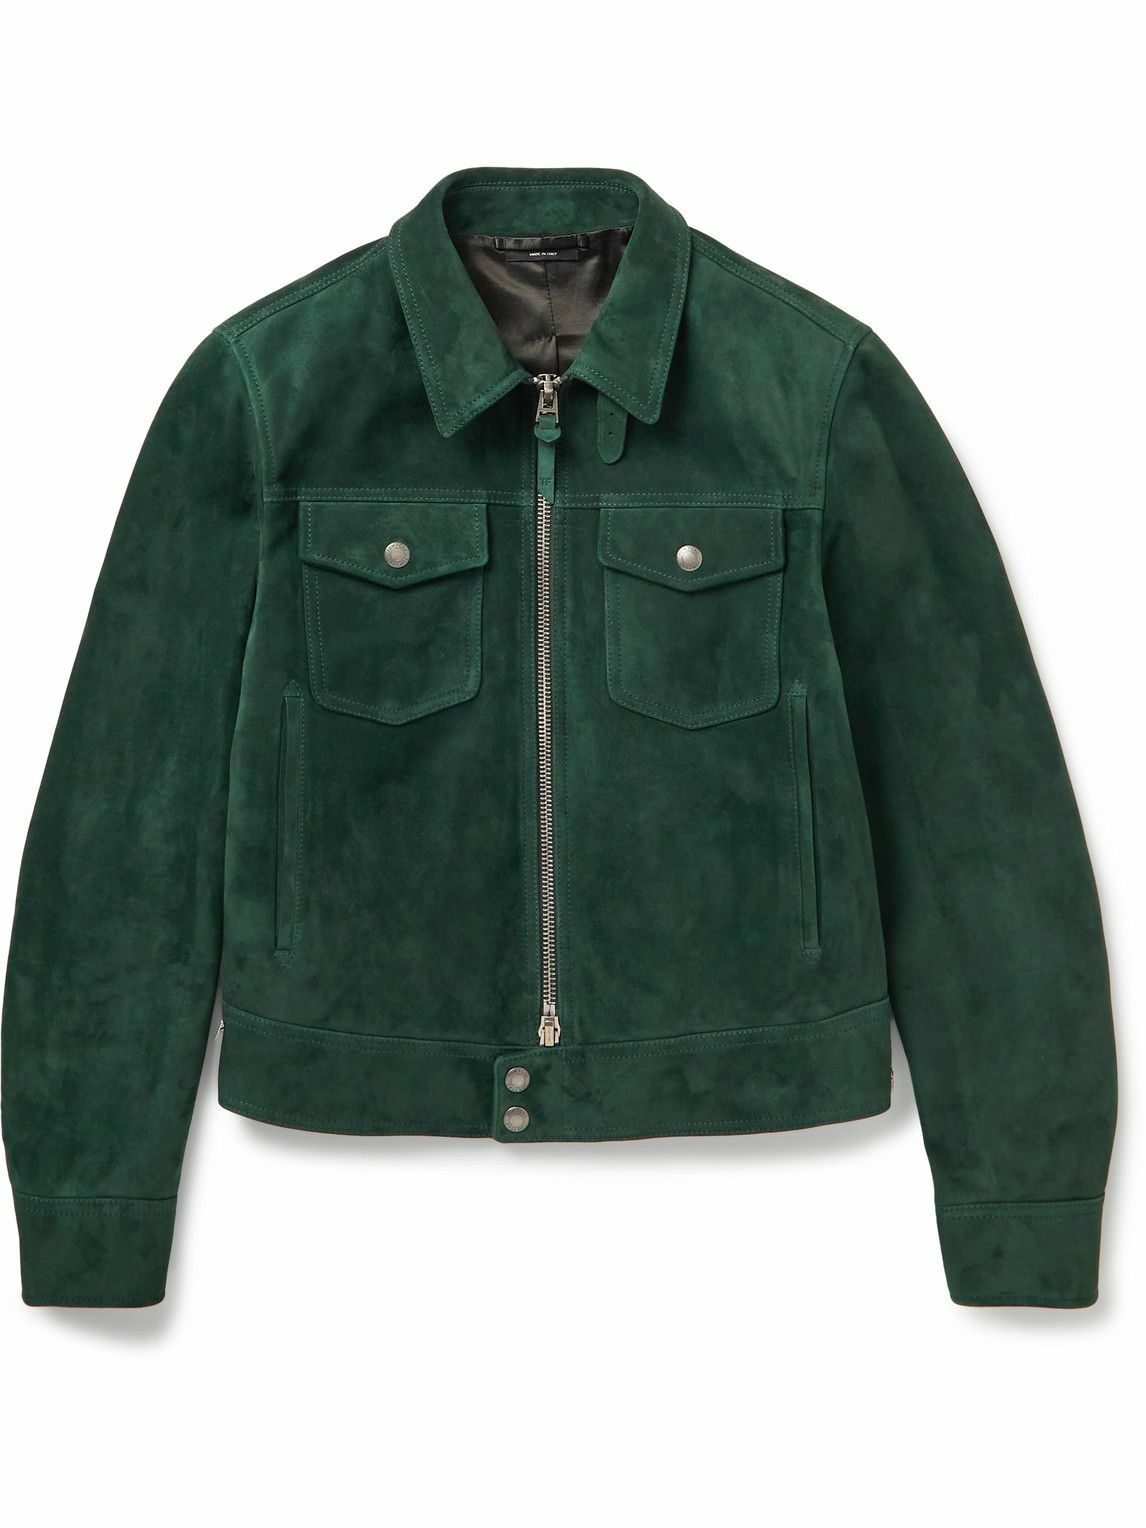 TOM FORD - Suede Blouson Jacket - Green TOM FORD